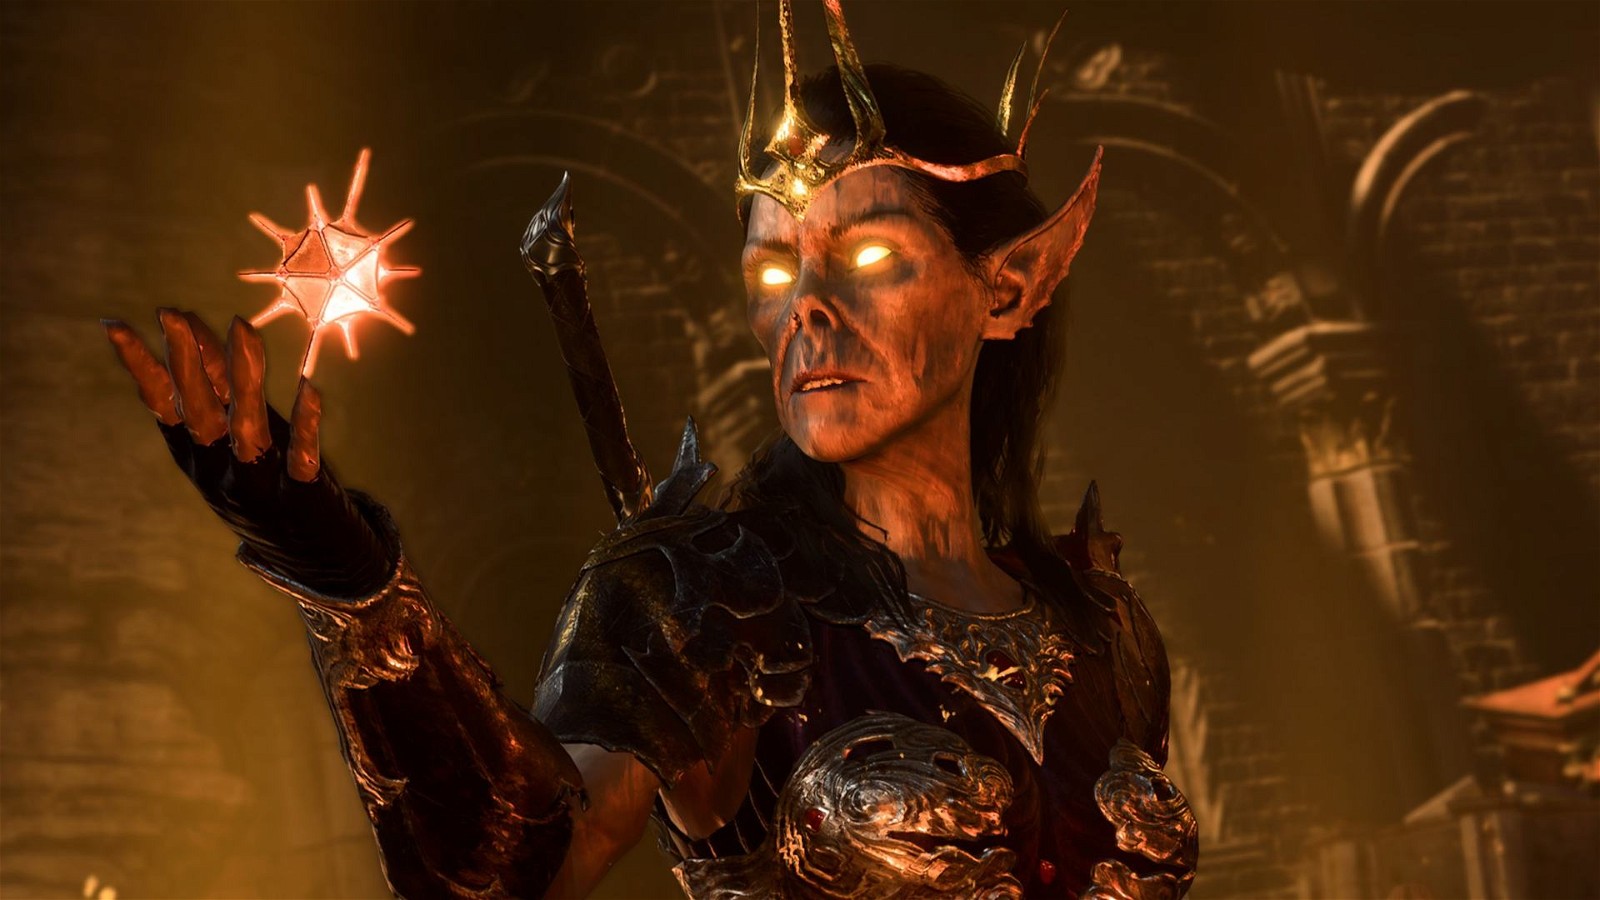 Baldur's Gate 3 DLC Could Potentially Be On The Table According To Larian's Senior Product Manager